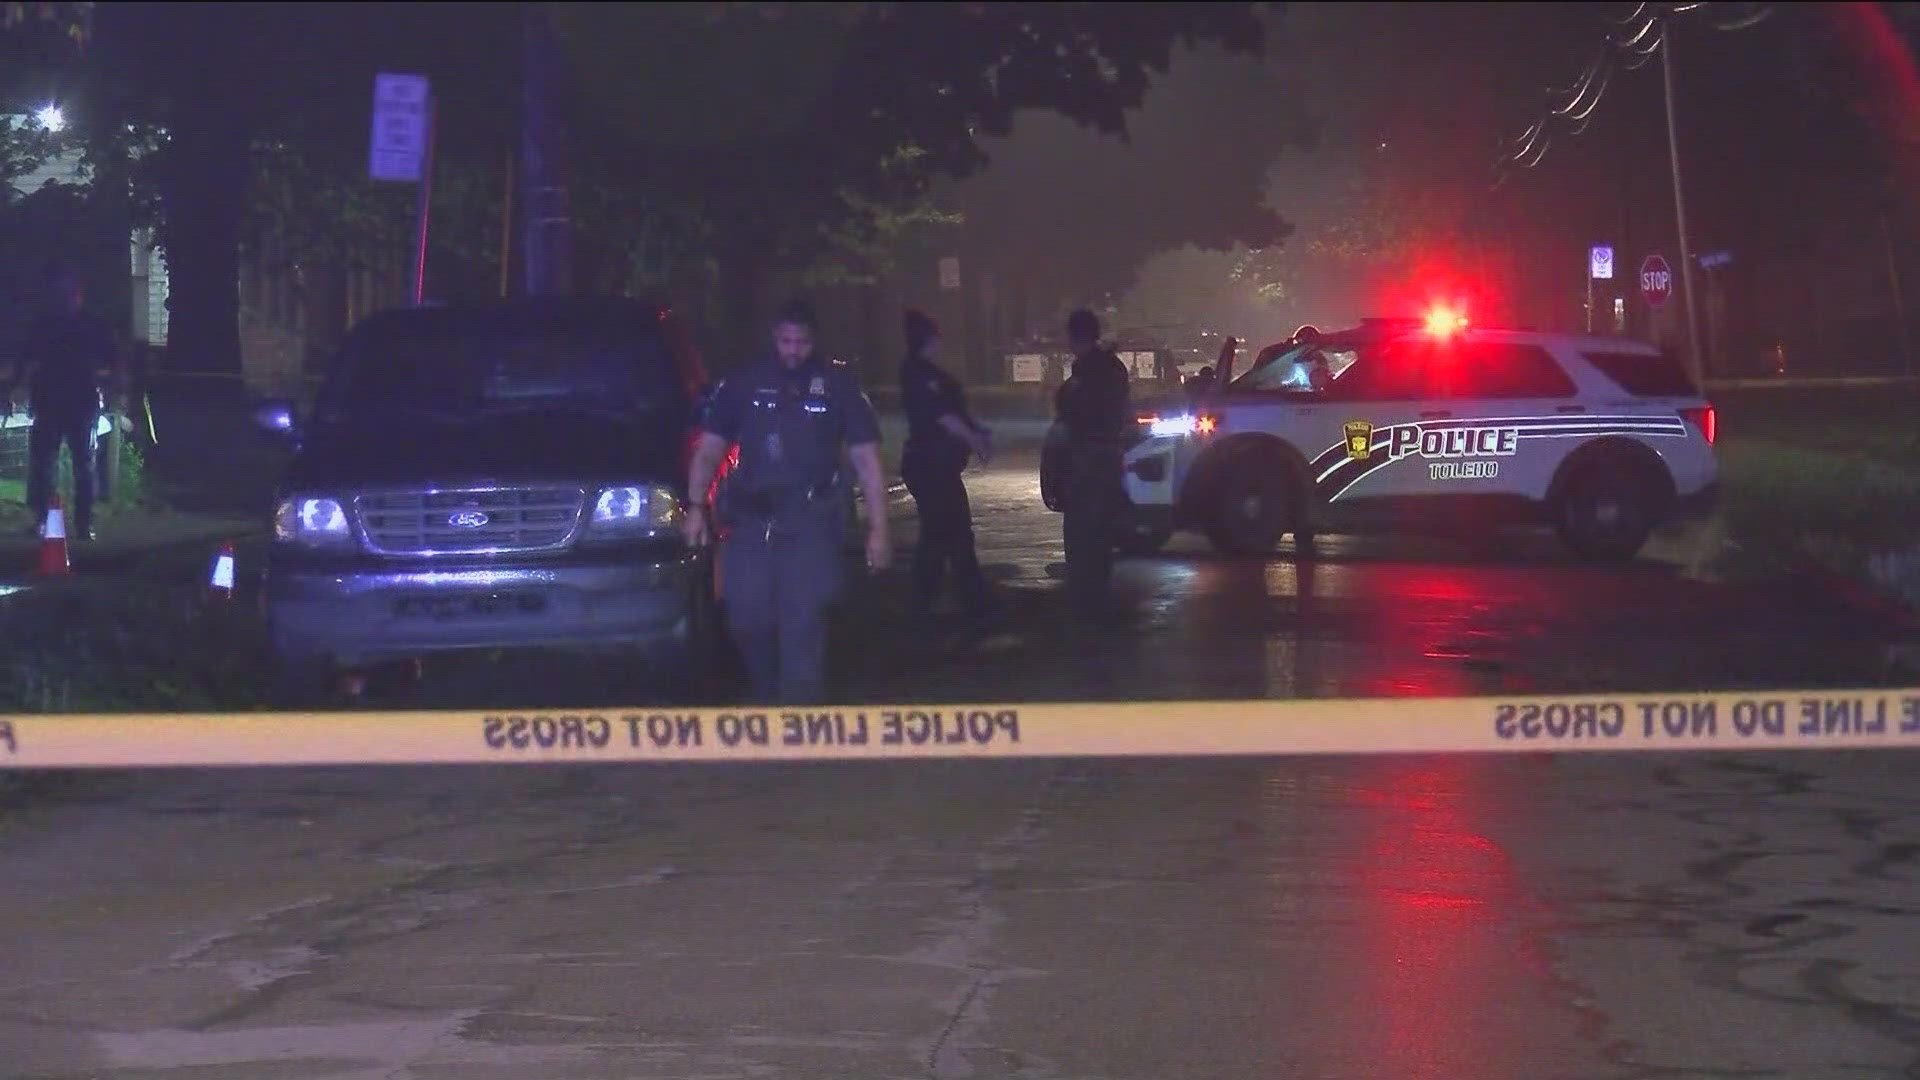 Police say the shooting happened on Earl Street near Butler and McKinley around 10 p.m.